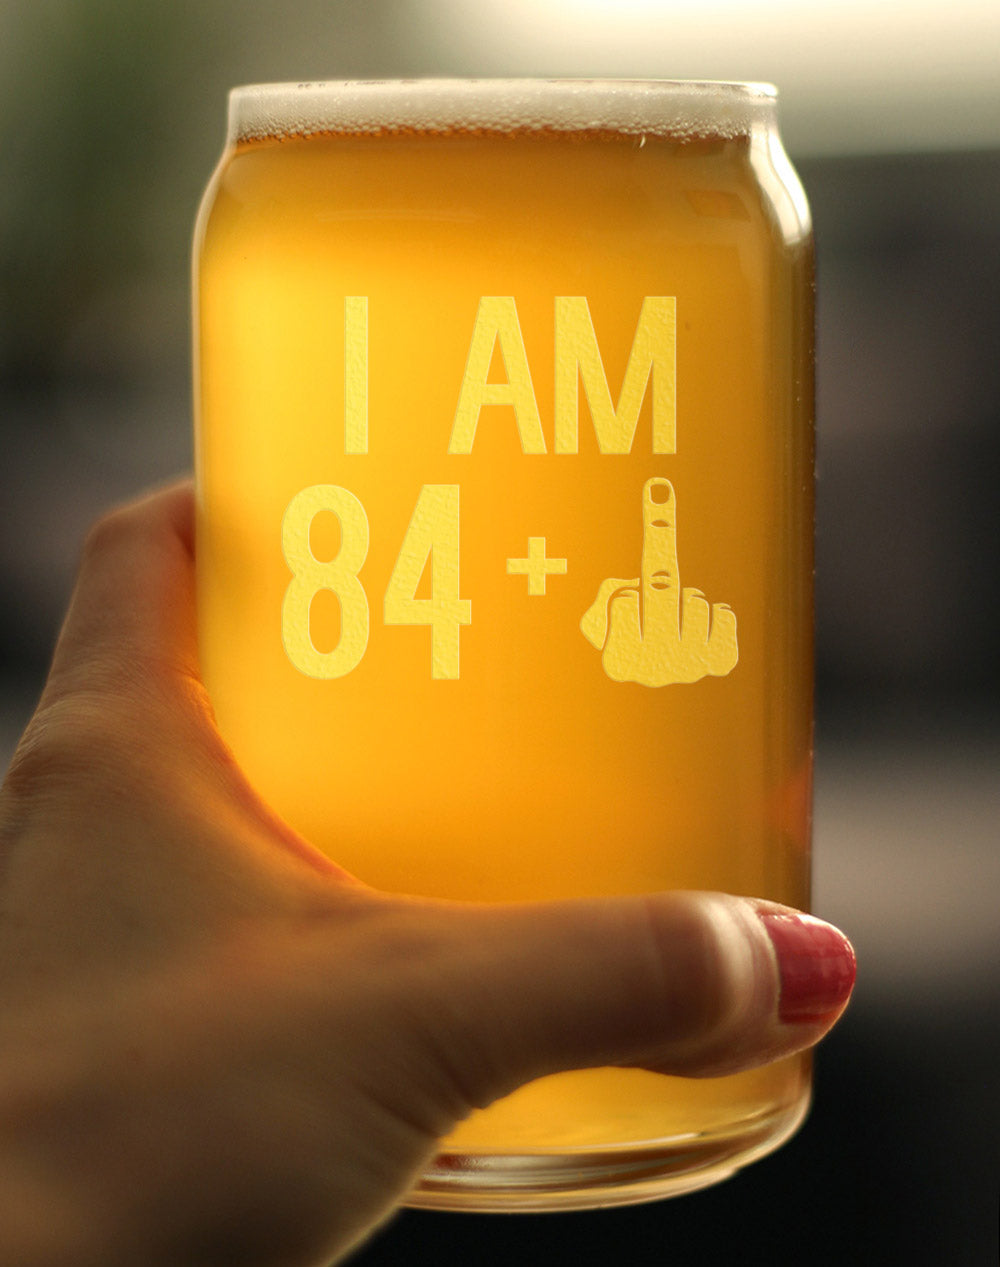 84 + 1 Middle Finger - 16 Ounce Beer Can Pint Glass